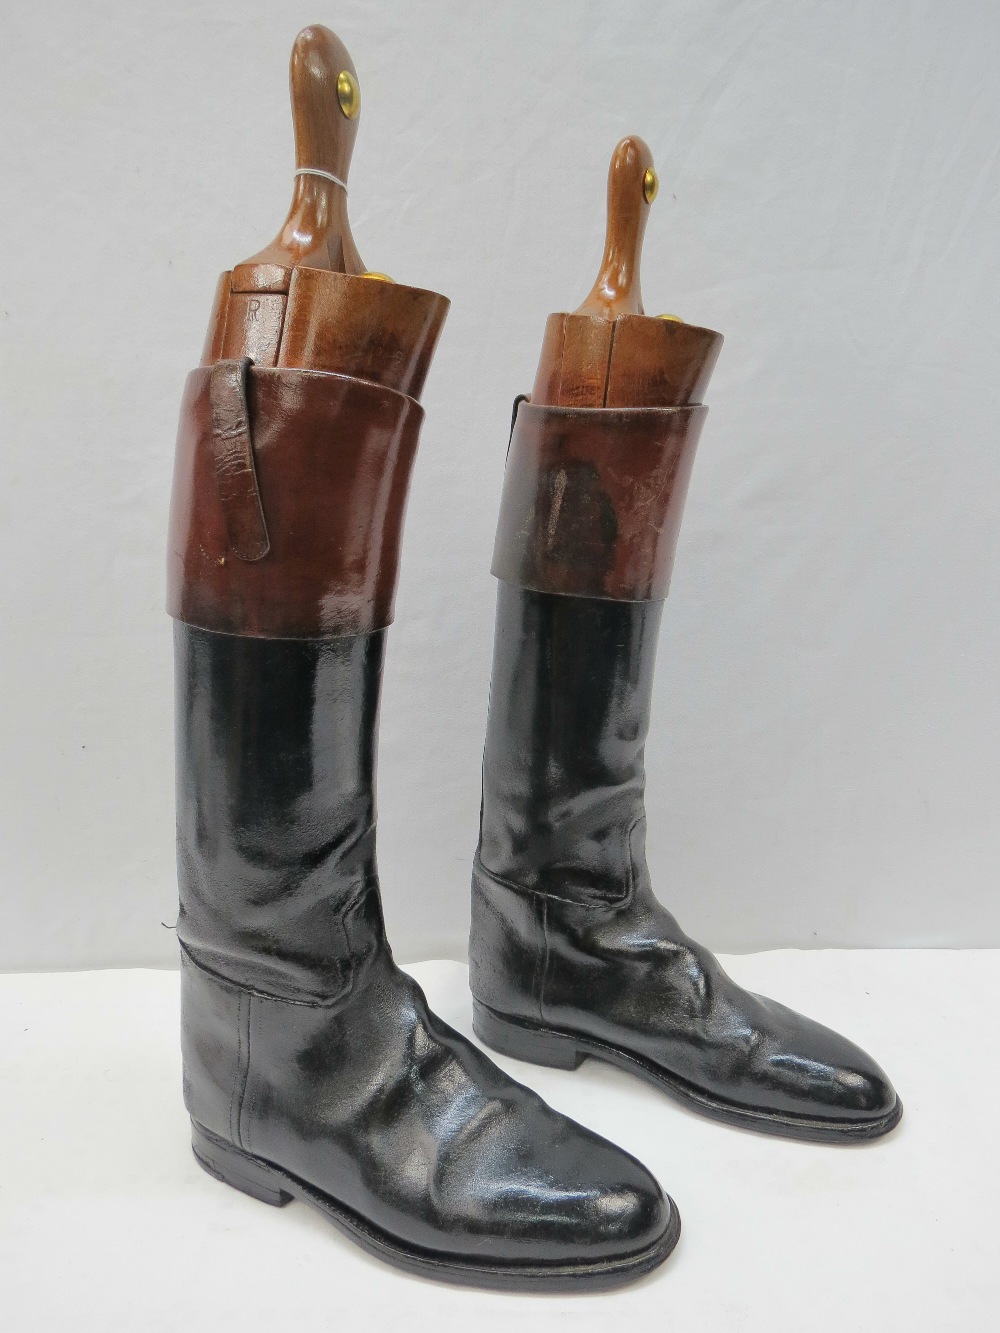 A pair of black and tan top boots with beechwood trees by Horace Batten of Ravensthorpe, Northants.